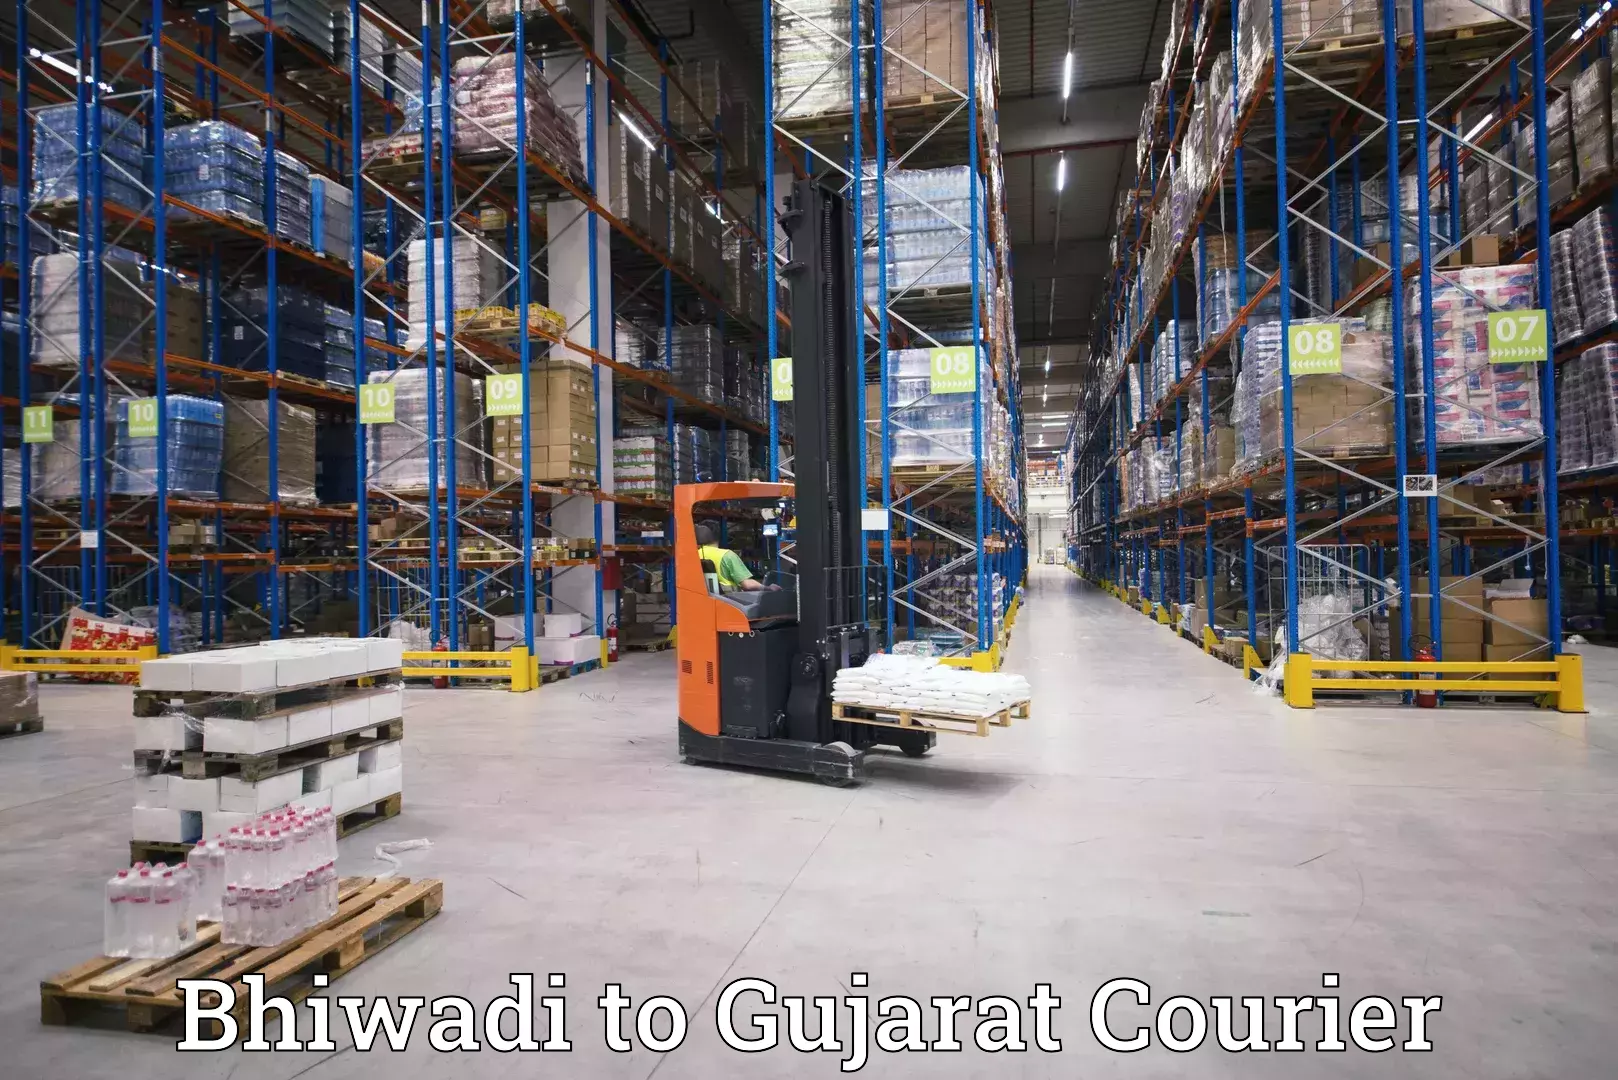 Nationwide delivery network Bhiwadi to Dholera